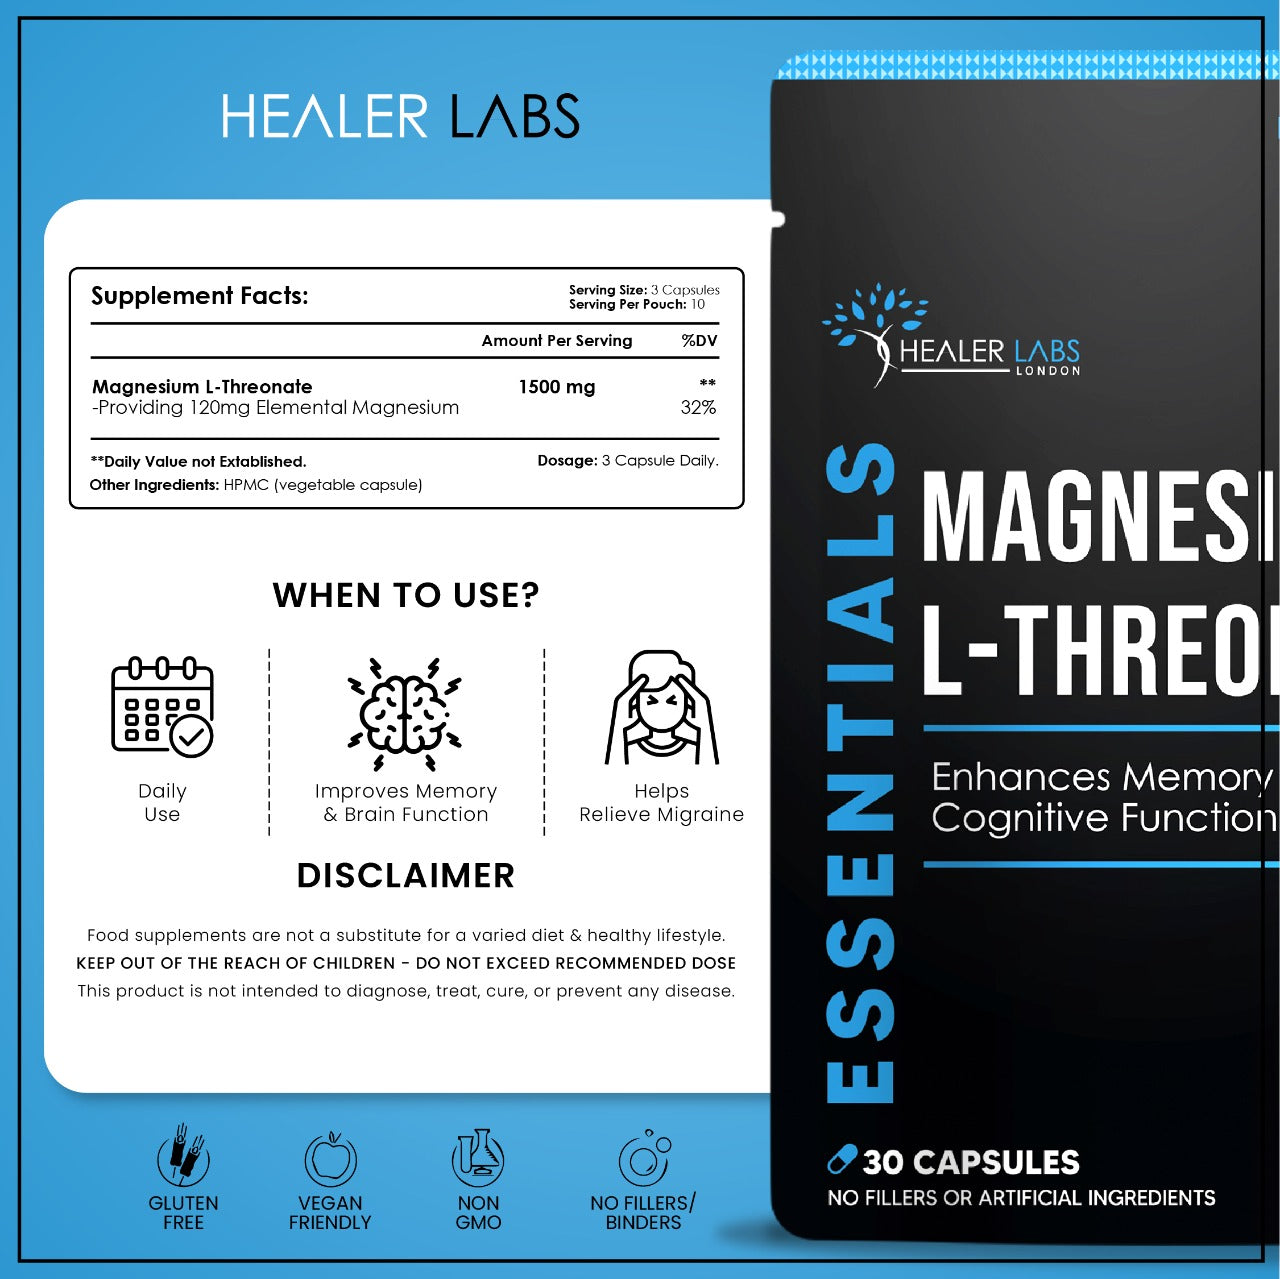  Healer Labs - Magnesium L-Threonate - The Beauty Corp.